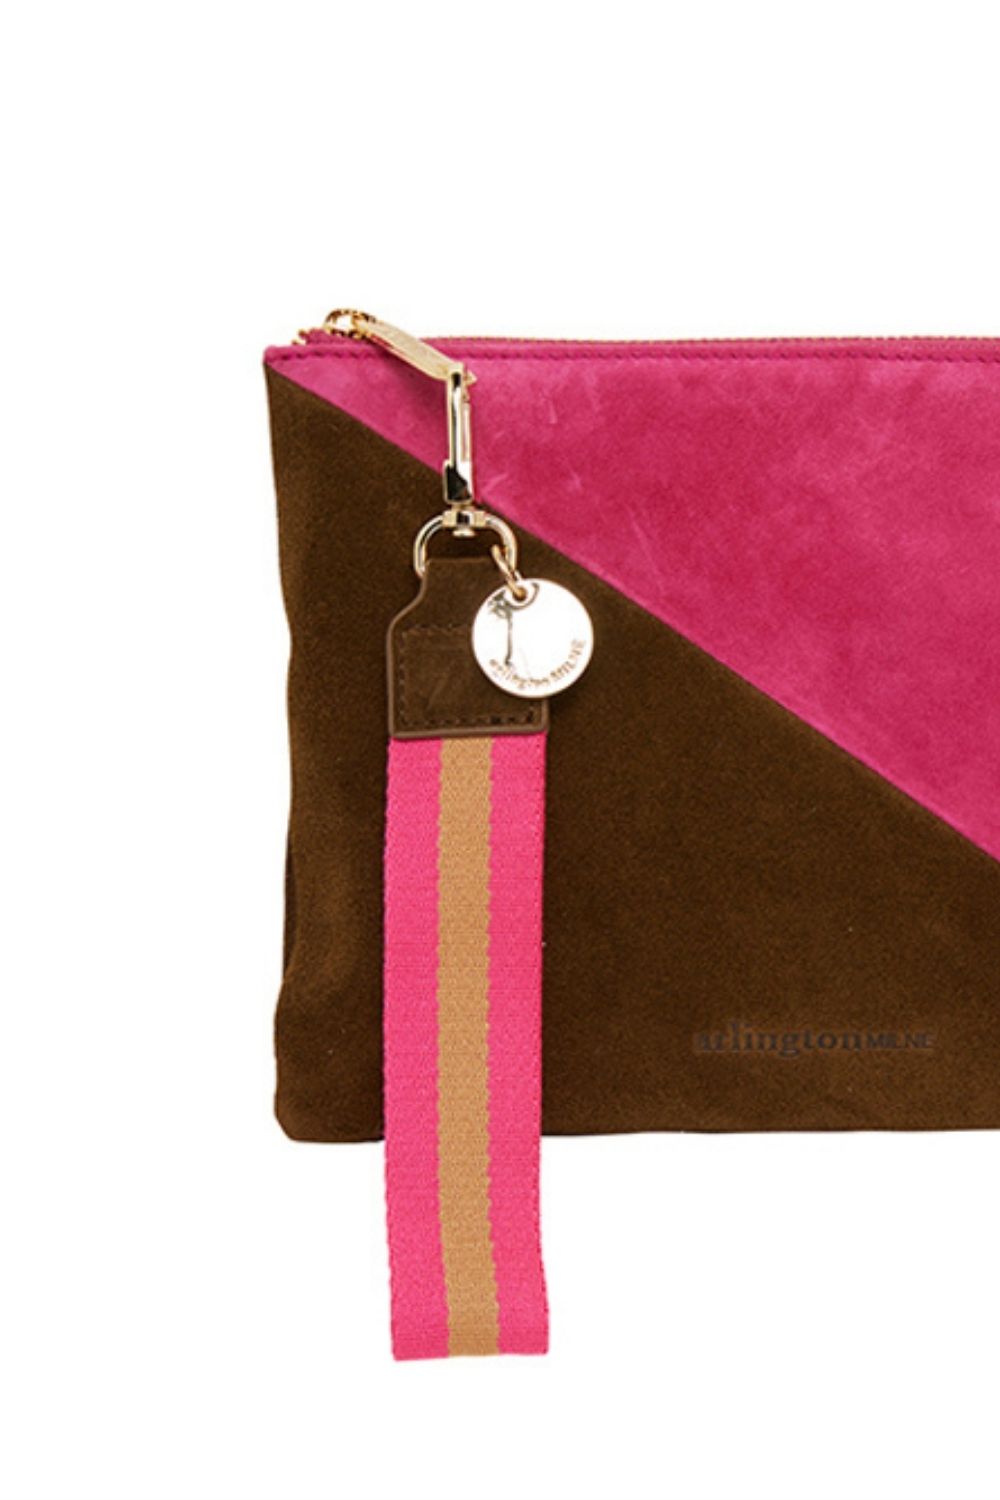 PAIGE CLUTCH SPLICE - KHAKI AND HOT PINK